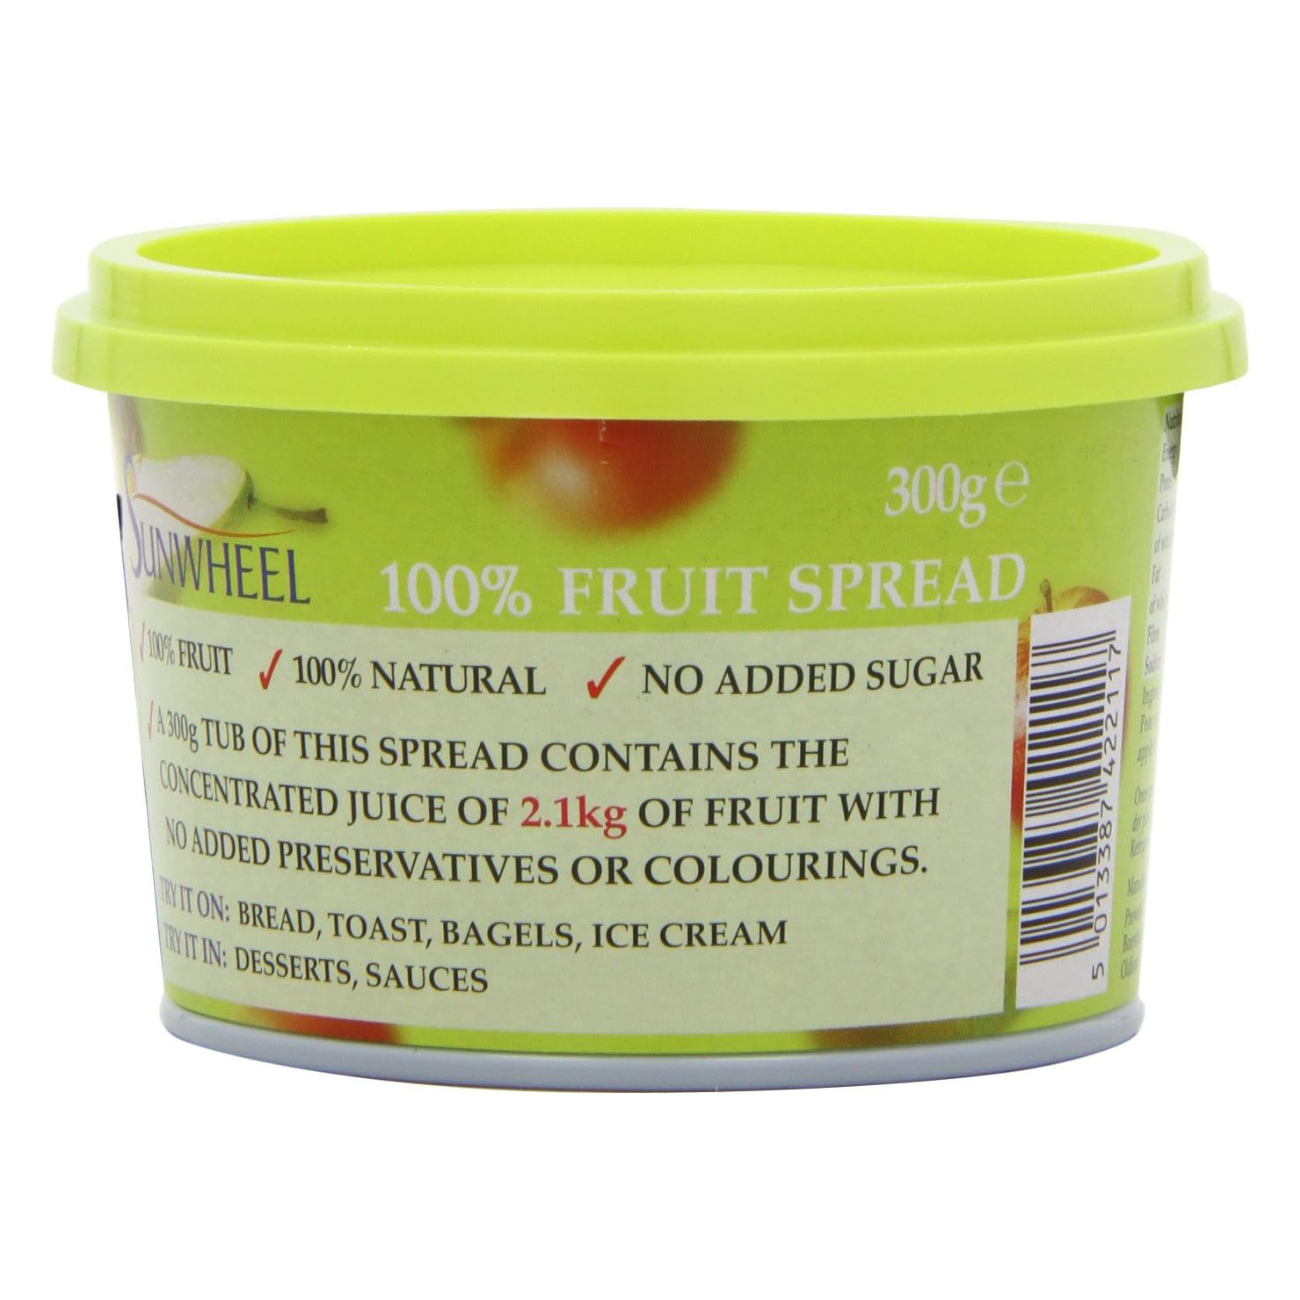 Pear and Apple Spread 300g